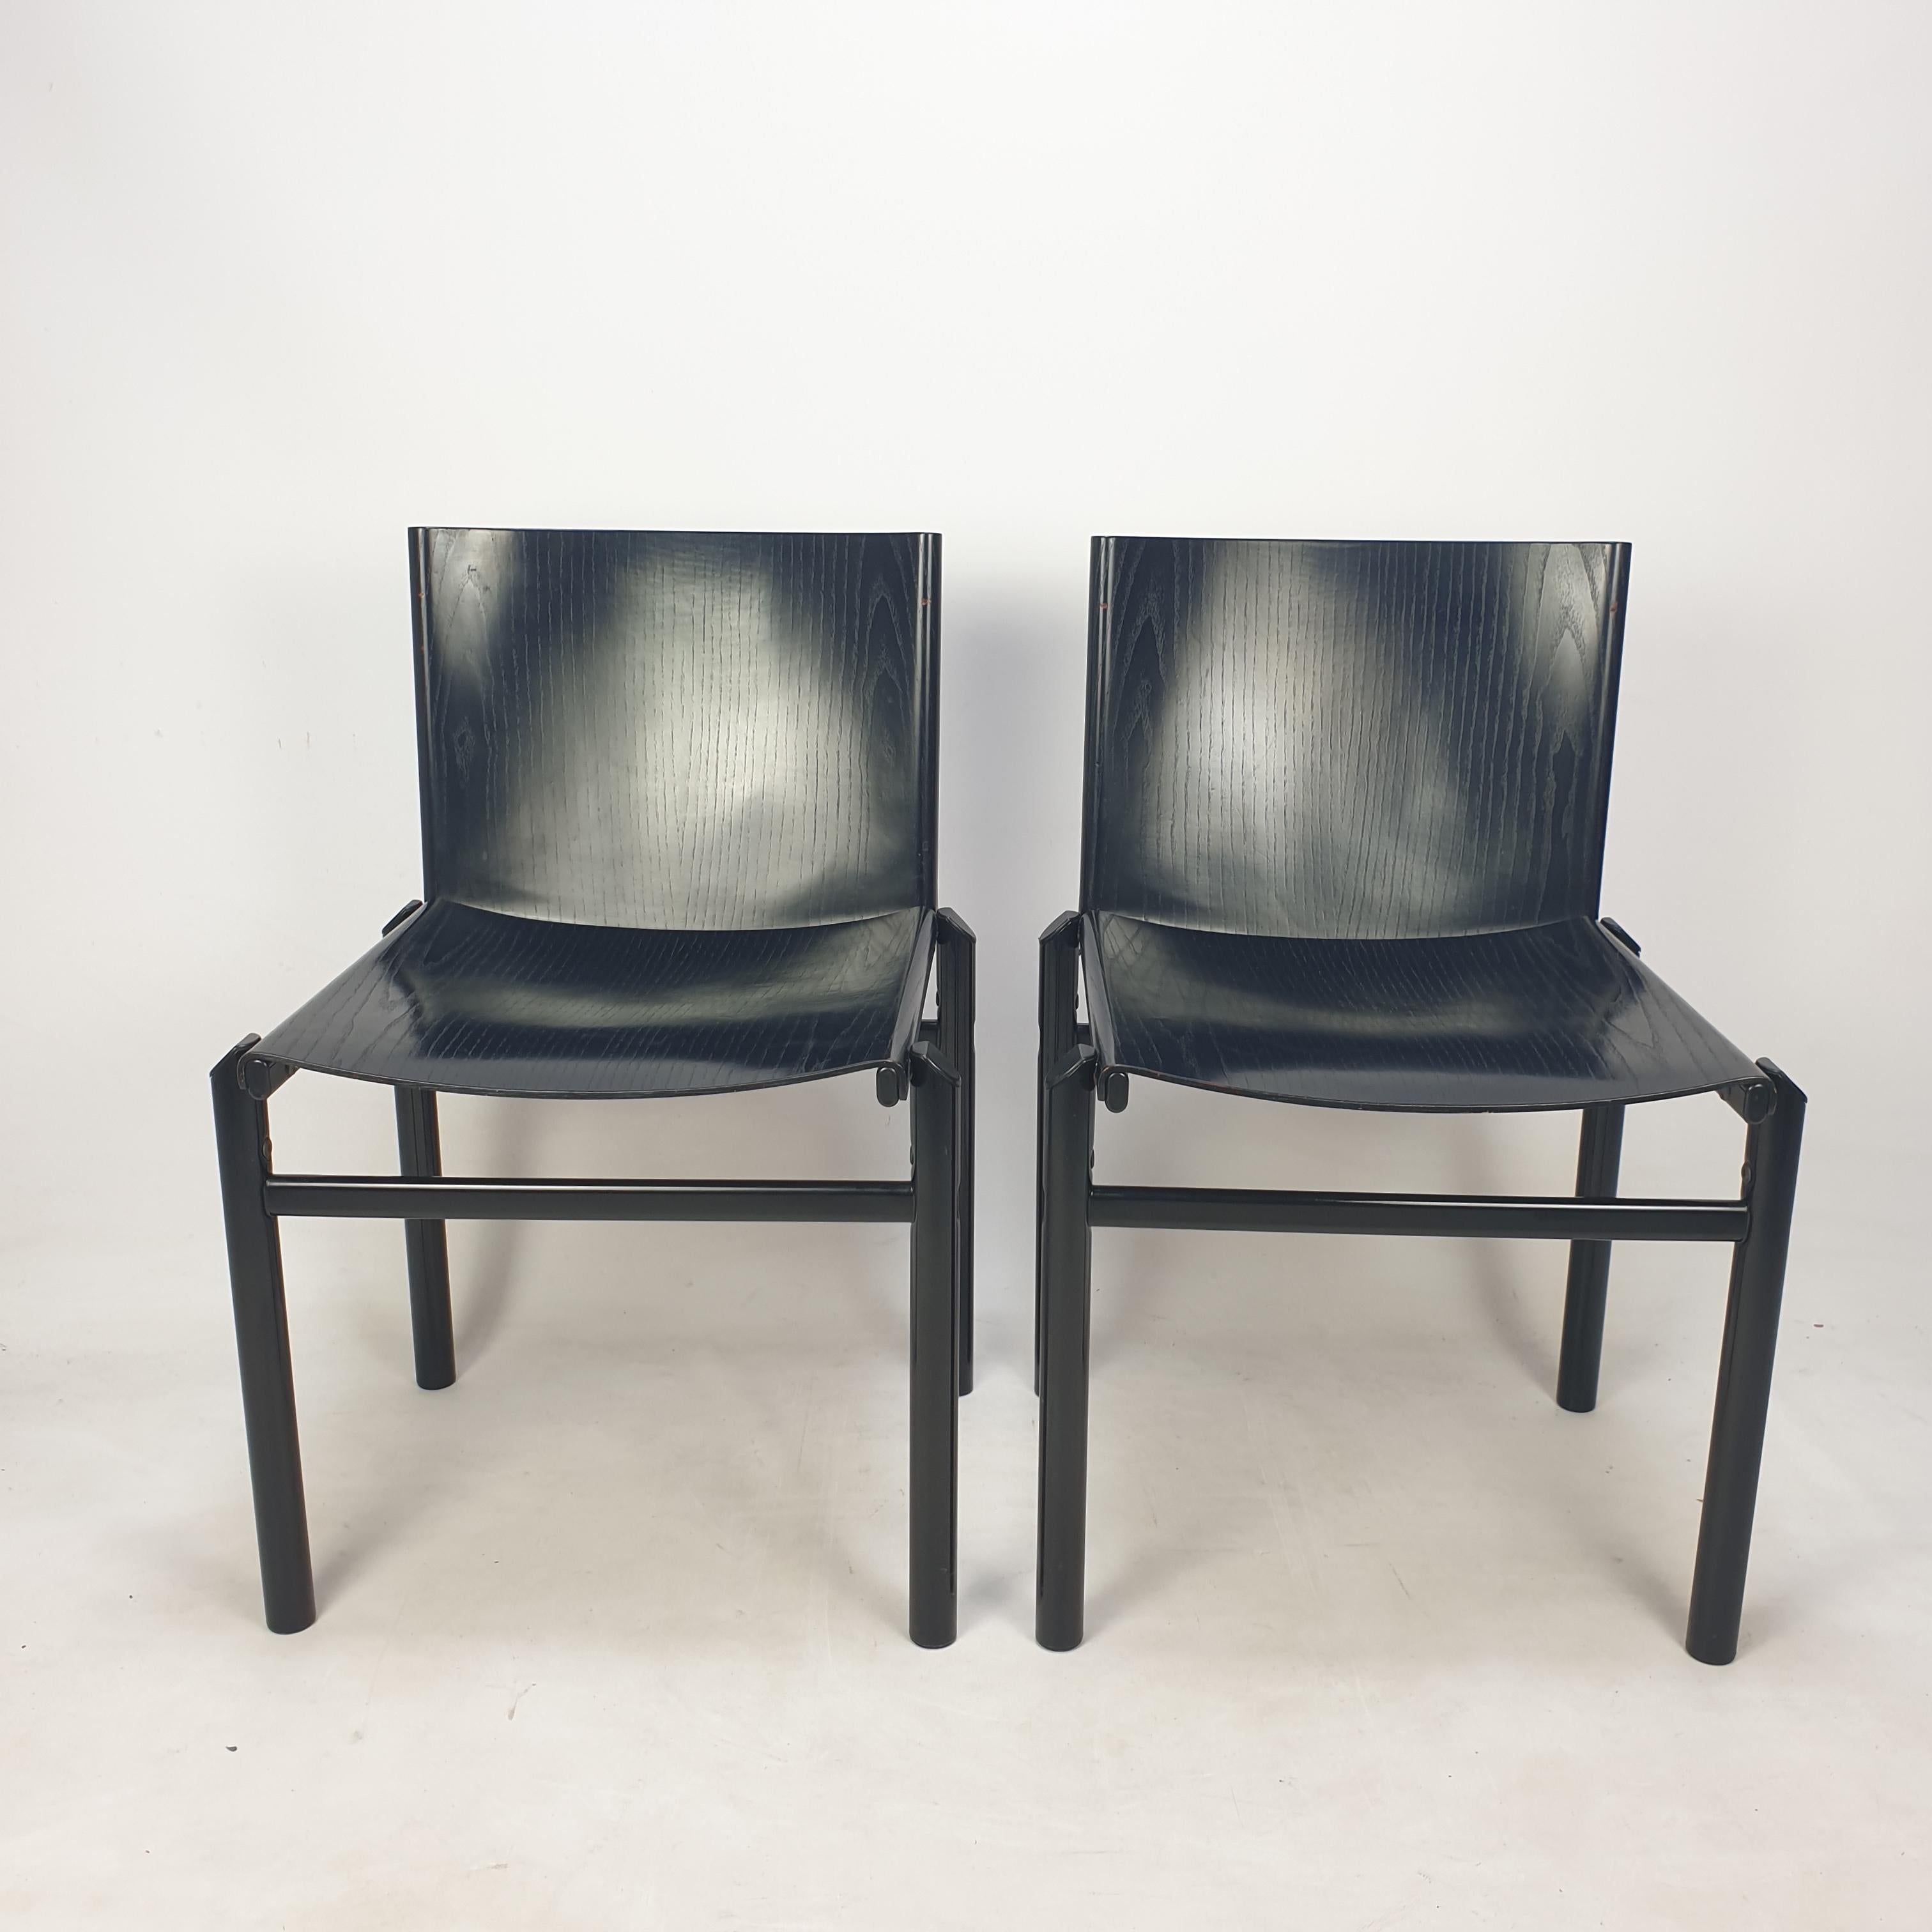 Rare set of 2 dining chairs by Afra & Tobia Scarpa, Italy, 1970's. 

A minimal and striking design with strong graphic lines and interesting details resulting in an architectural appearance. 
The simple but solid frames are constructed out of black